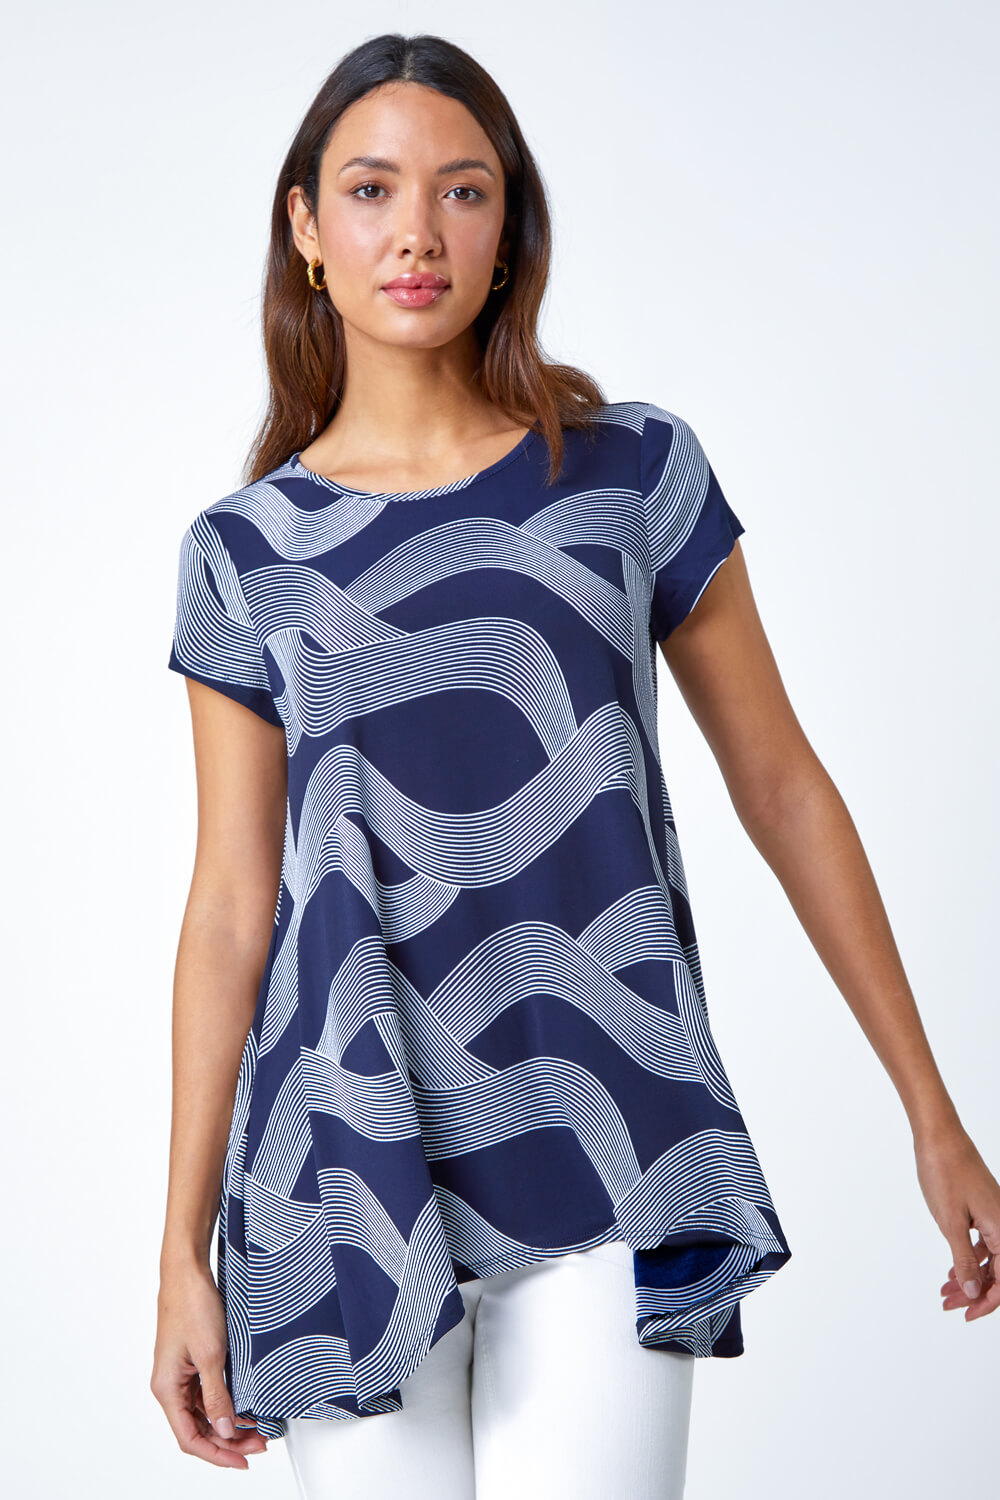 Abstract Swirl Print Stretch Top